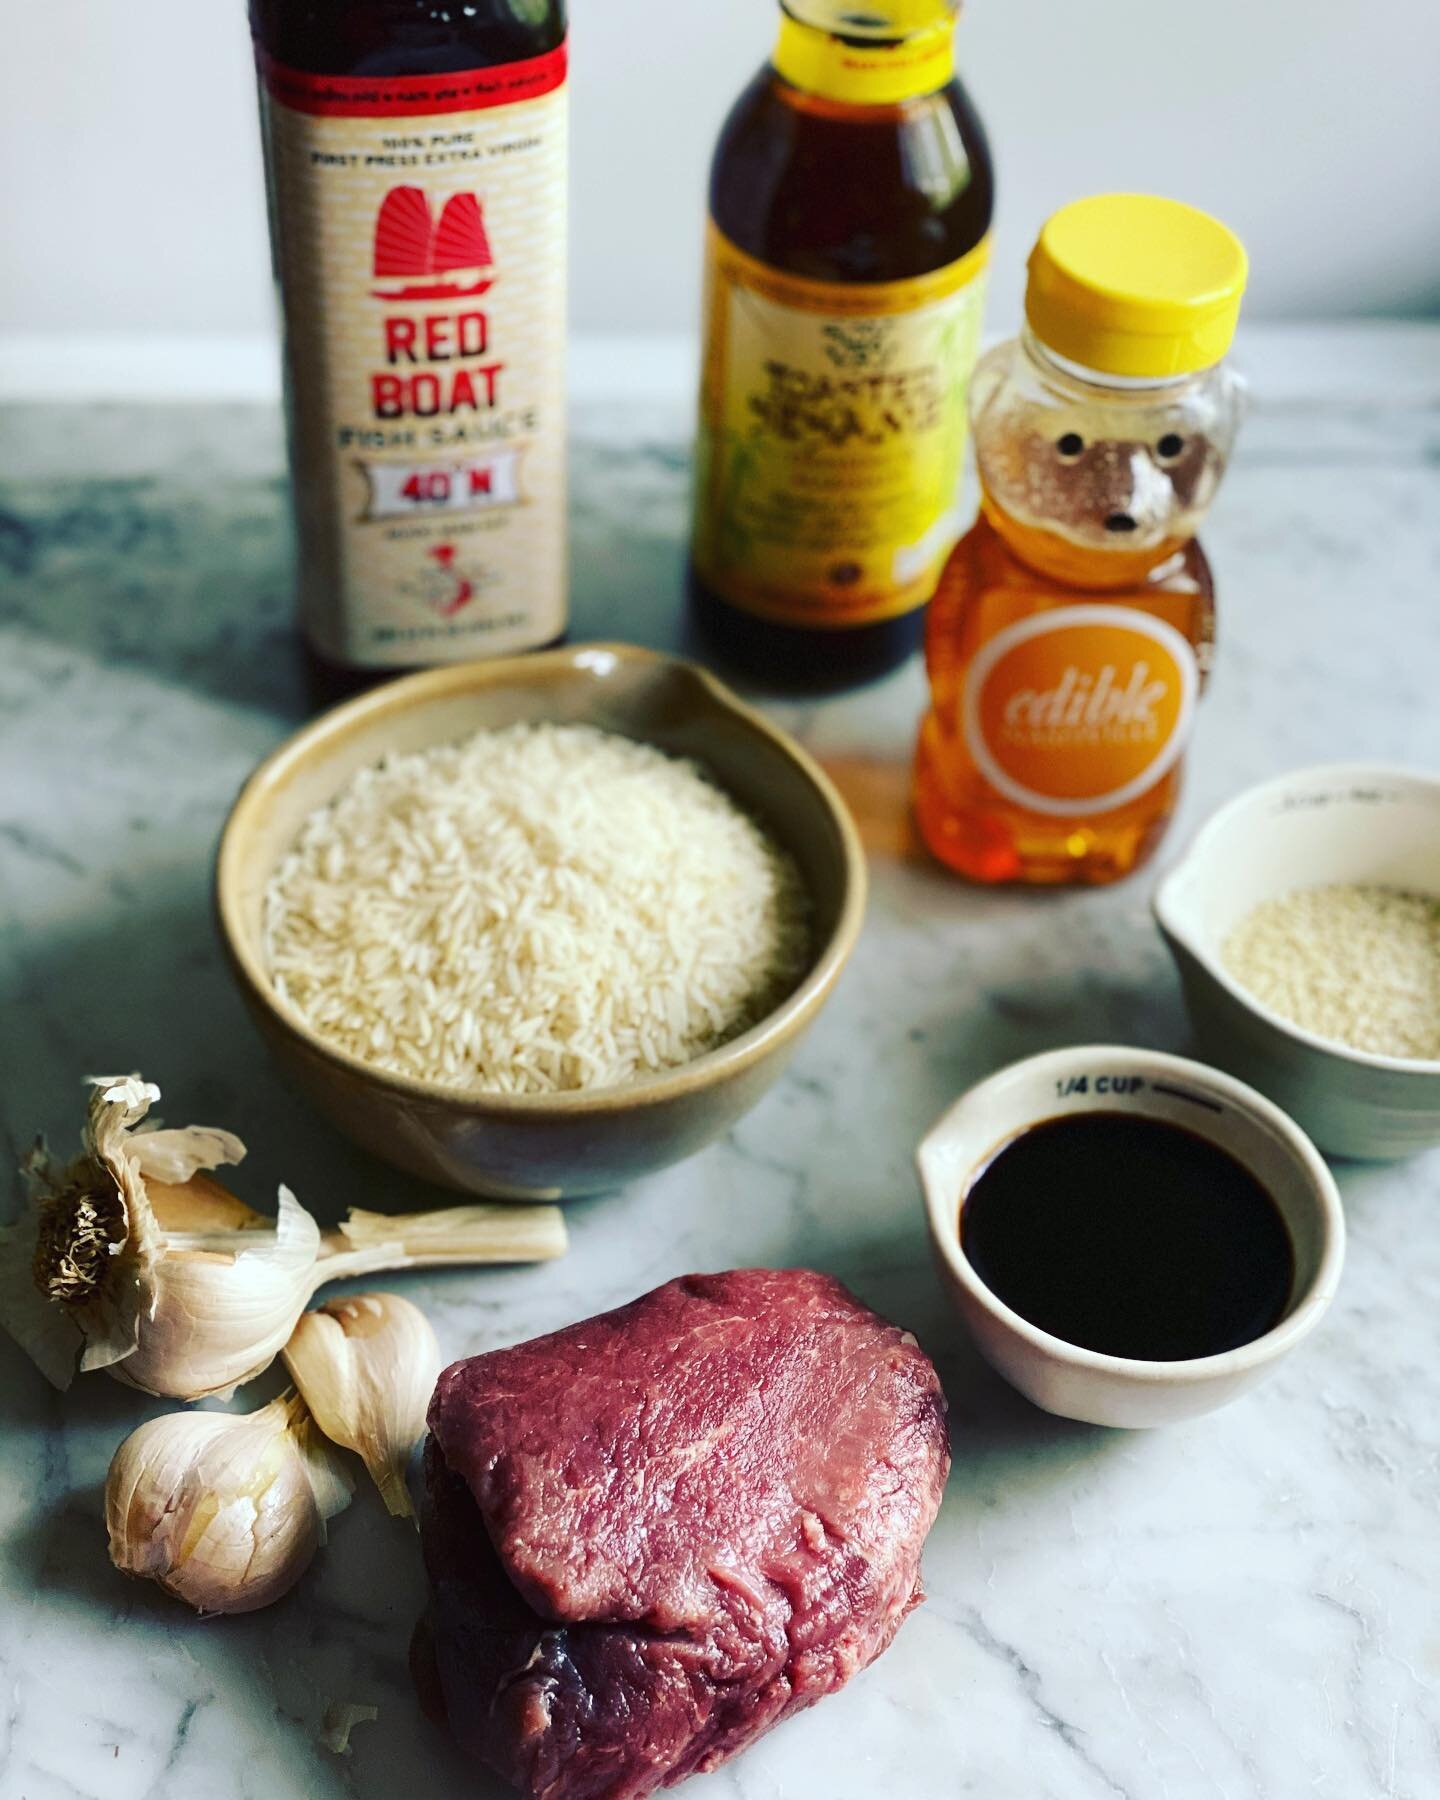 BULGOGI mise en place! 

We&rsquo;re going live at 2pm with @iamskylarbush who will be making Bulgogi, easy Korean BBQ (sugar, sesame and soy sauce yum)  Segment will air Monday Sept. 7 on @todayinnashville watch as we film the segment! Beef from @tn